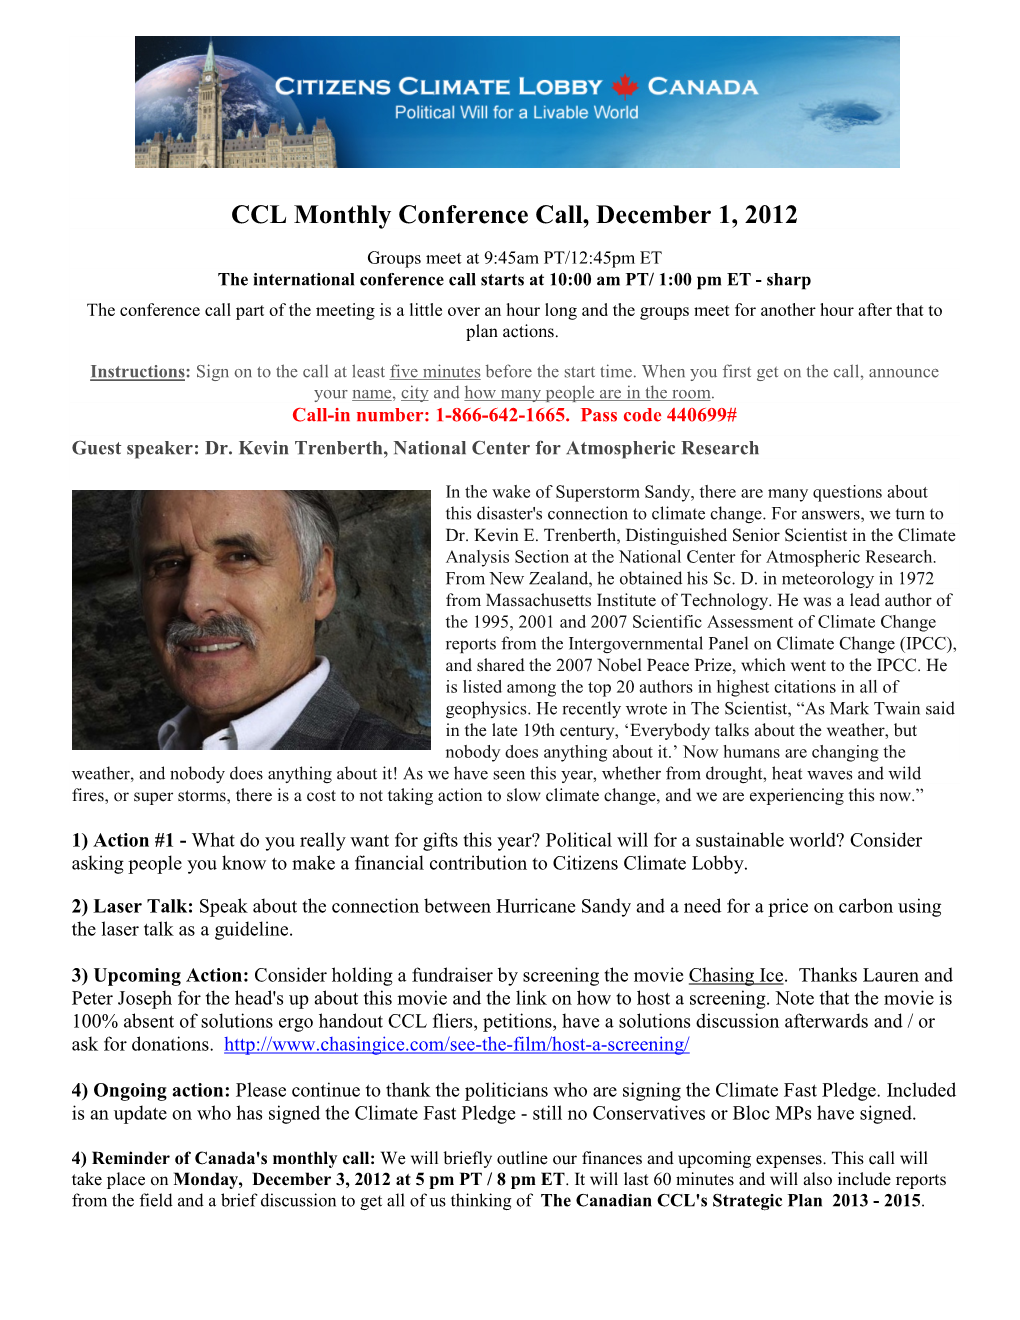 CCL Monthly Conference Call, December 1, 2012